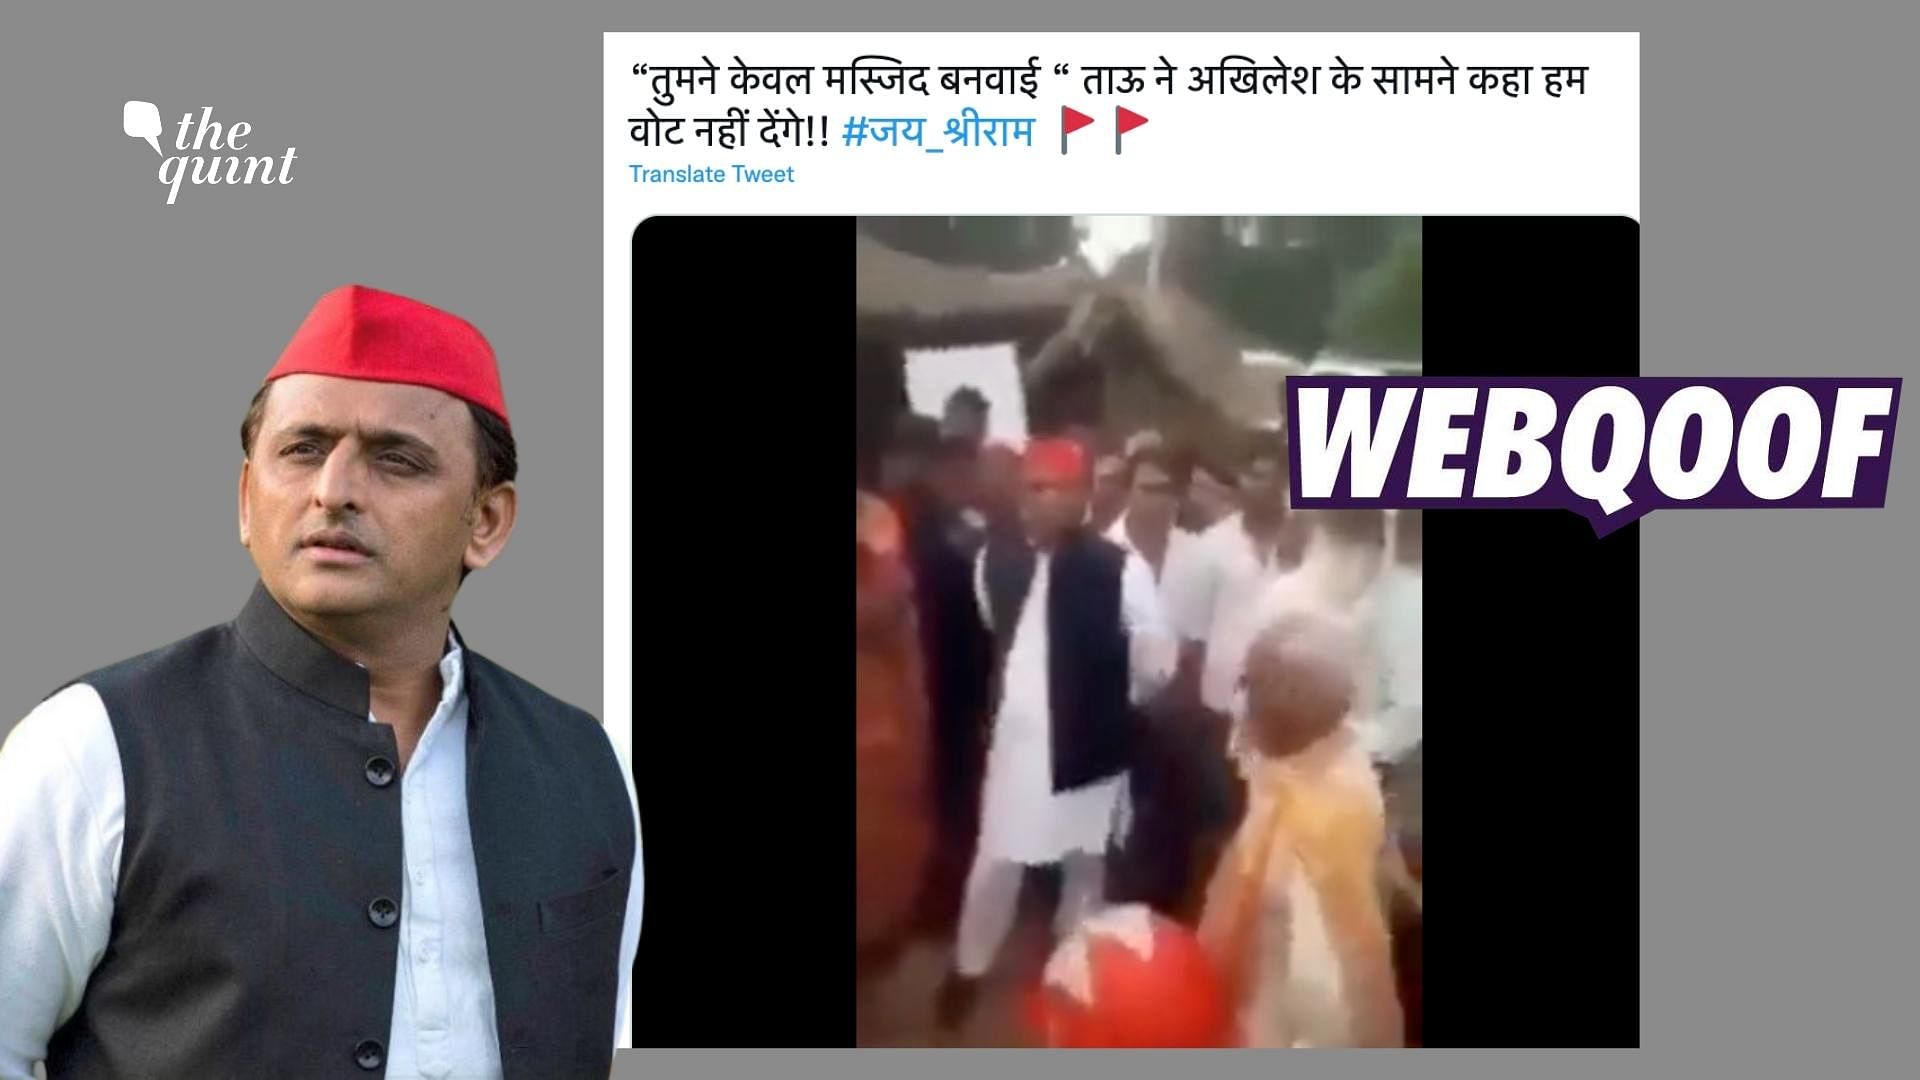 <div class="paragraphs"><p>The claim states that the elderly man was saying Akhilesh Yadav that "you have only built Masjids".&nbsp;</p></div>